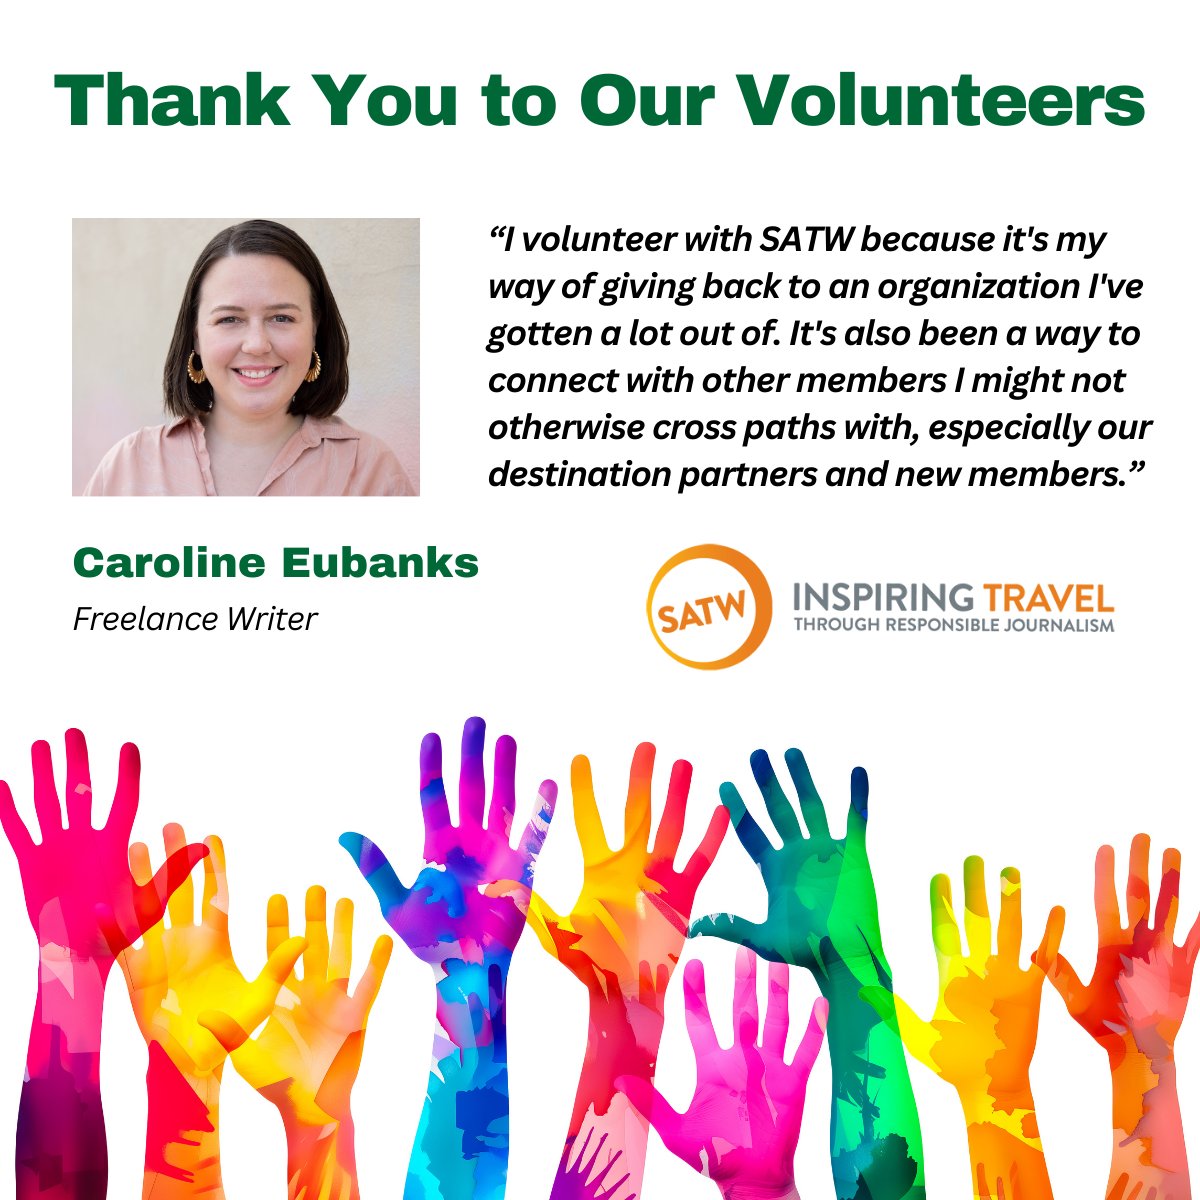 .@cairinthecity volunteers with SATW because it's her way of giving back & connecting with other society members. Thank you, Caroline, for all you do!

#NationalVolunteerWeek #TravelWriting #TravelBlogging #Travel